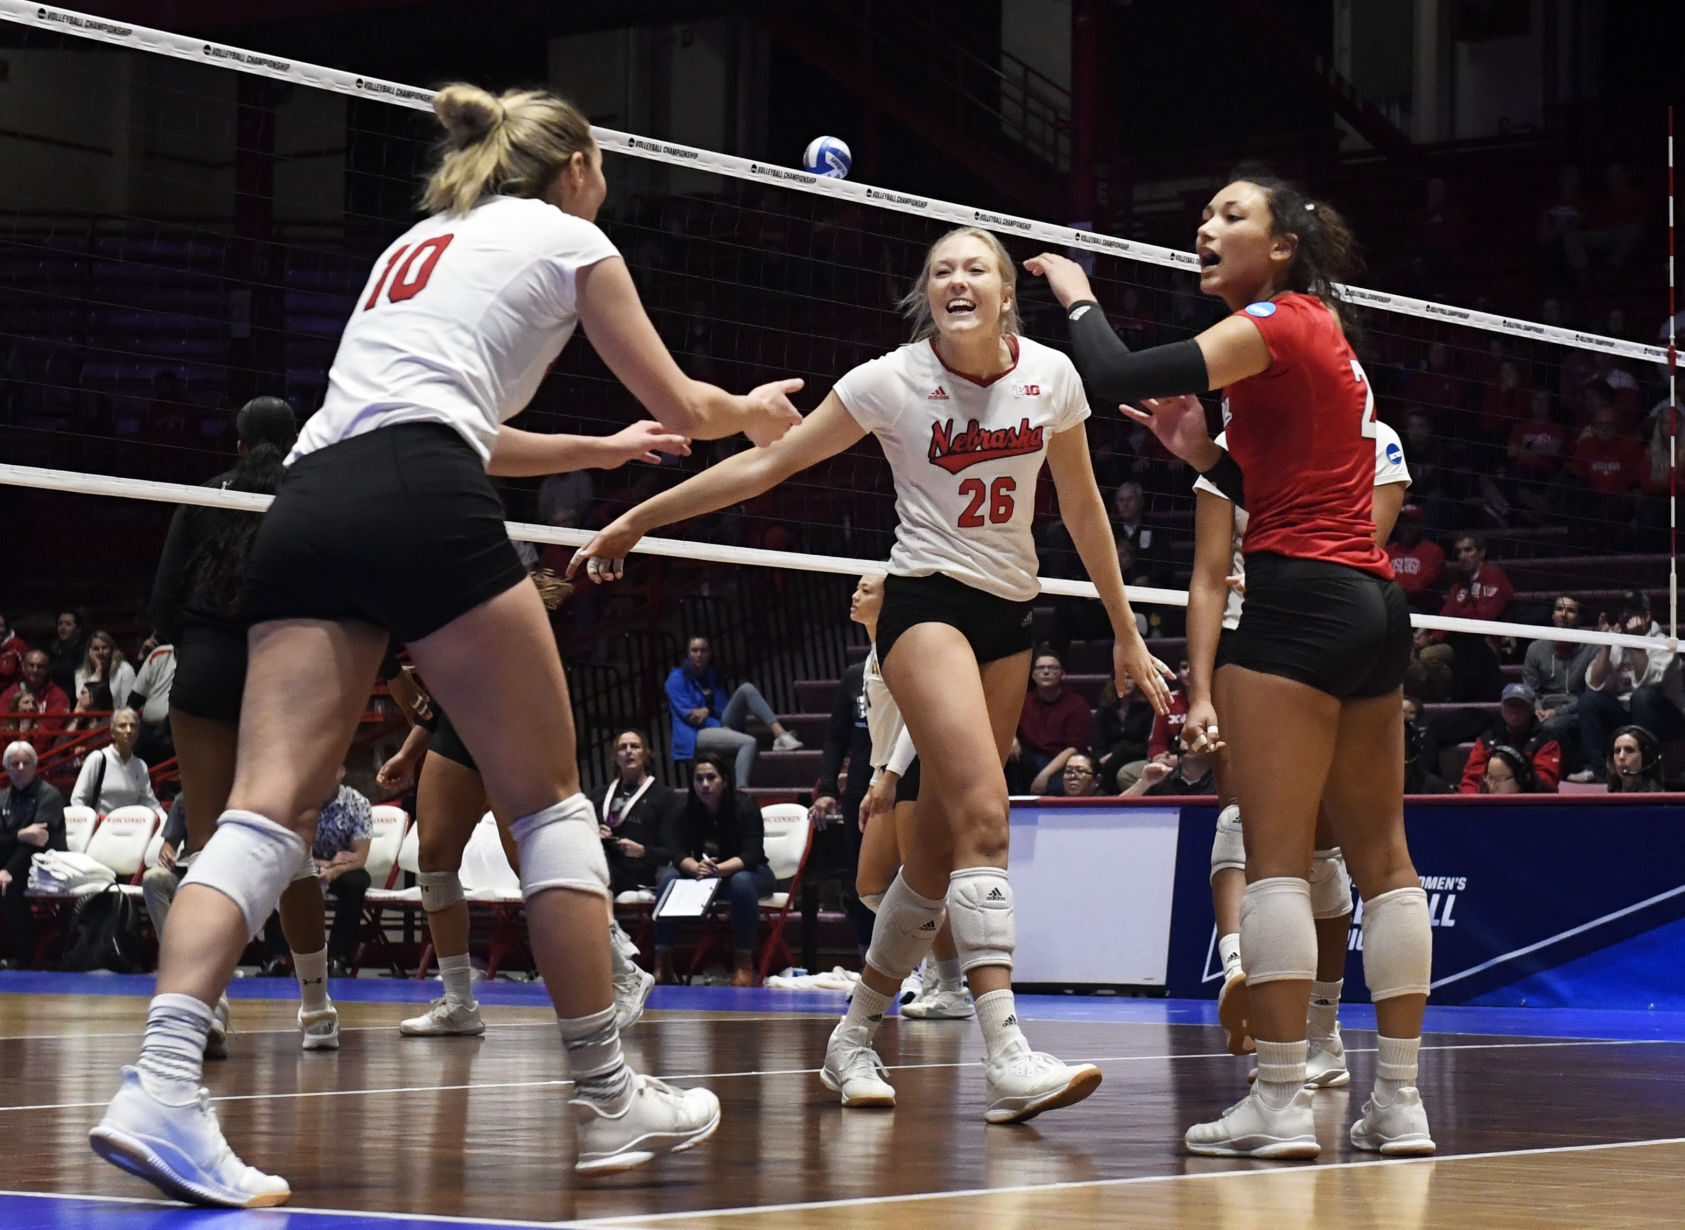 Want to watch Husker volleyball on TV this year? Youll have plenty of chances